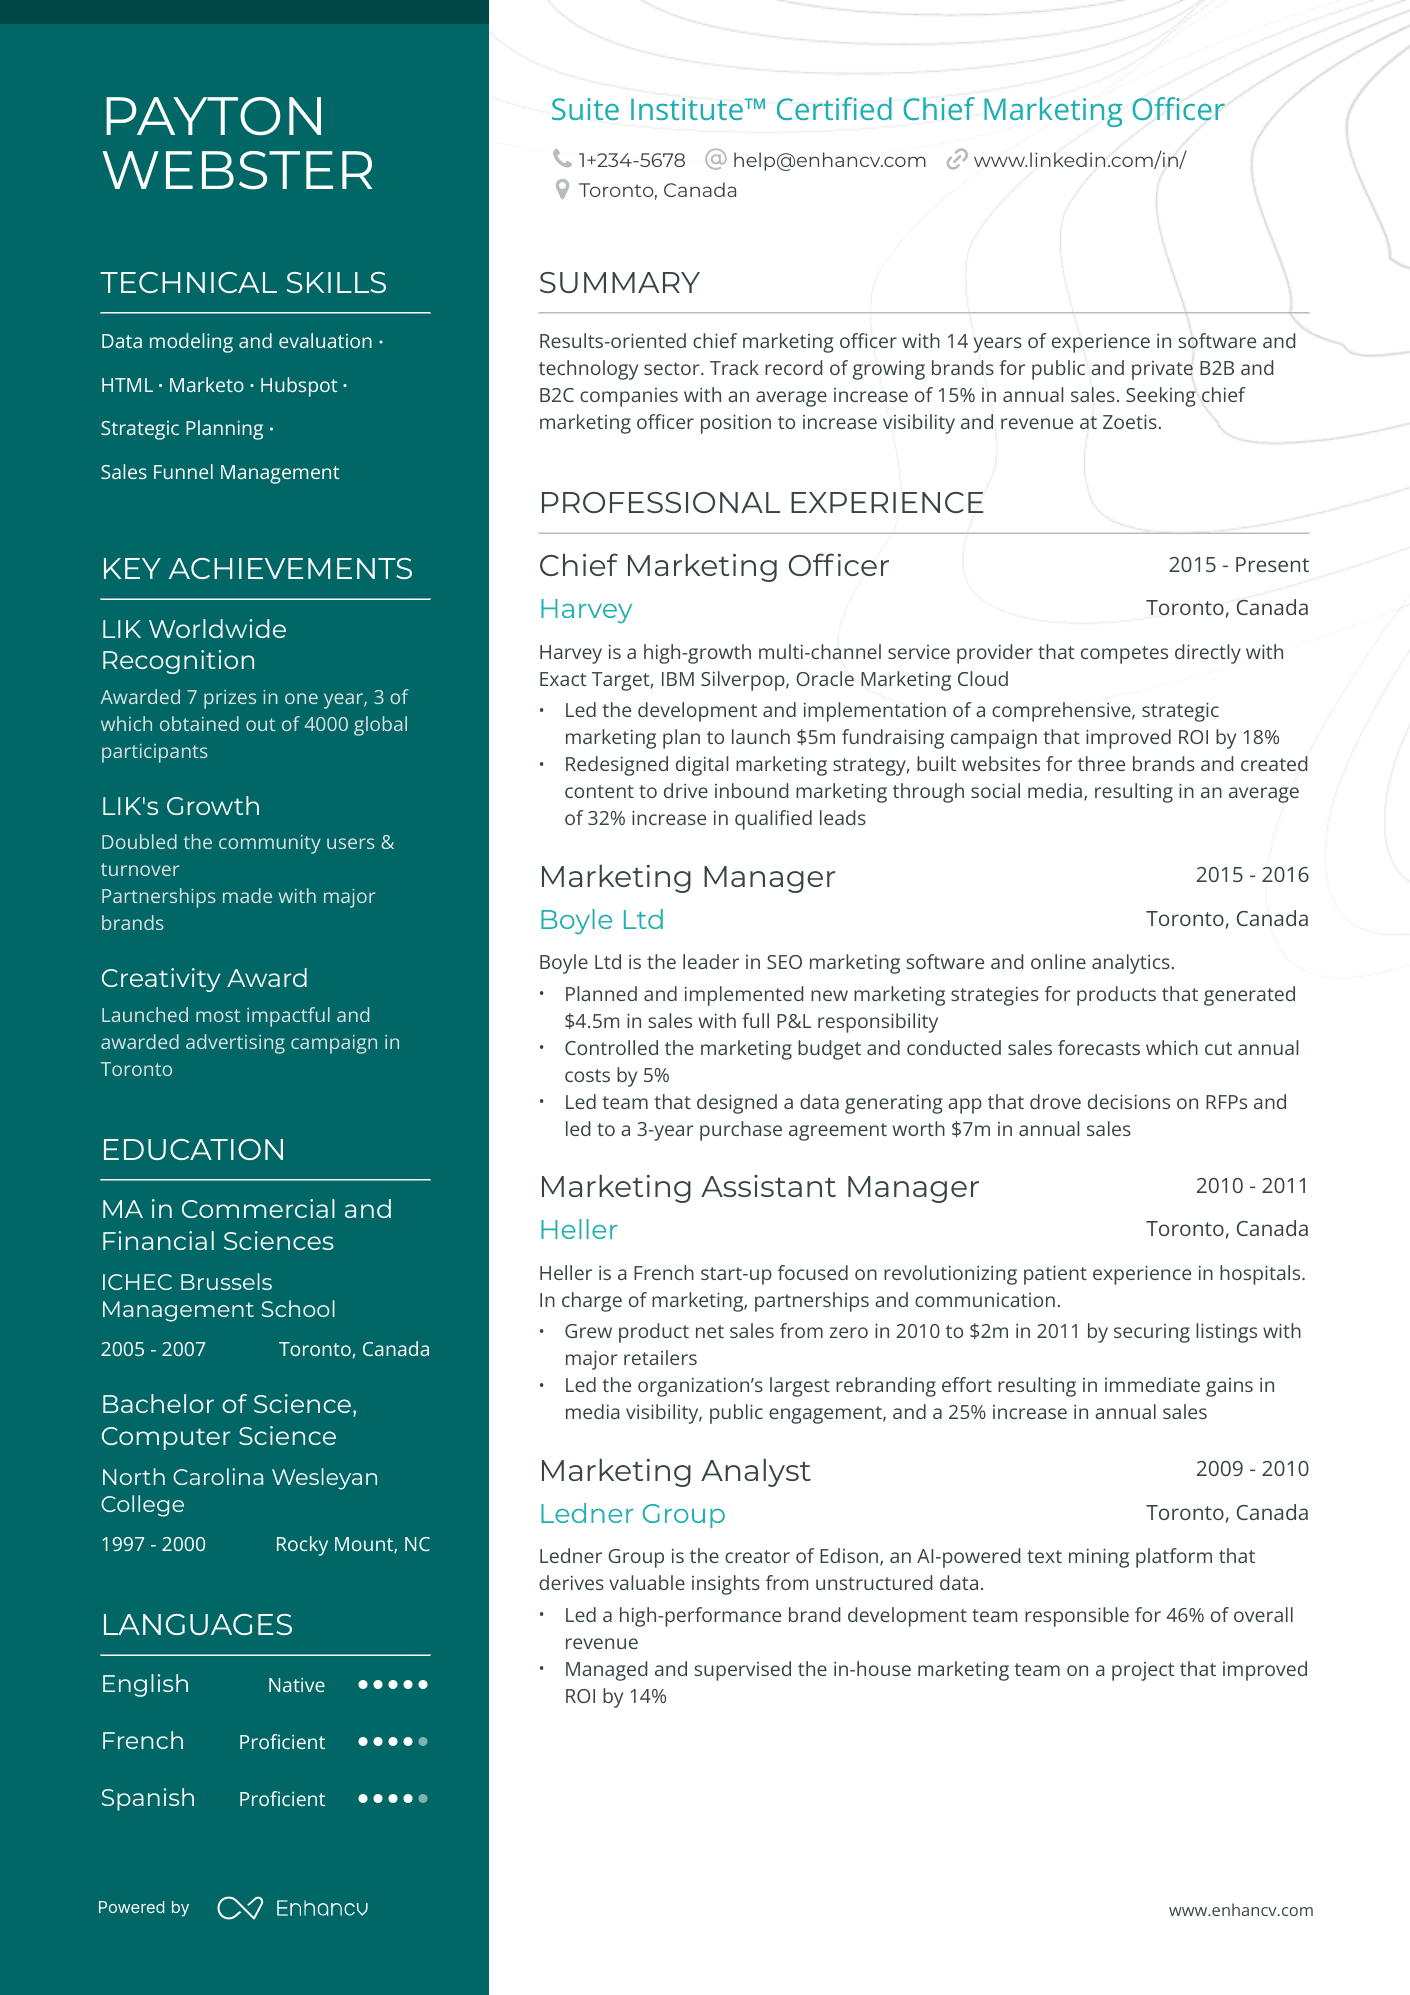 Suite Institute™ Certified Chief Marketing Officer resume example